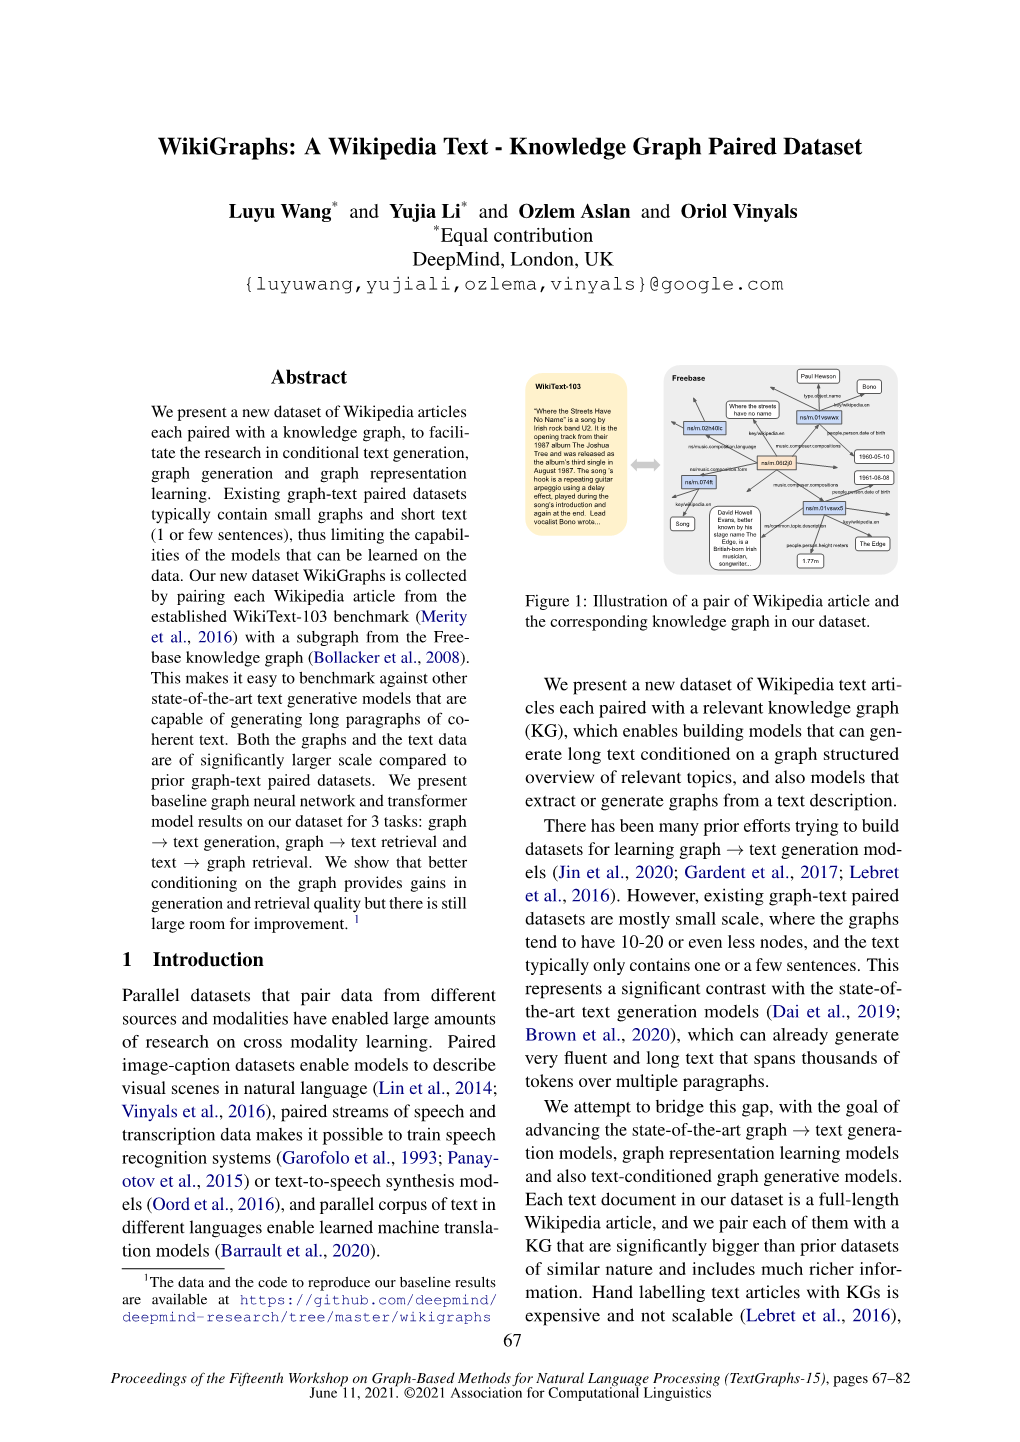 Wikigraphs: a Wikipedia Text - Knowledge Graph Paired Dataset